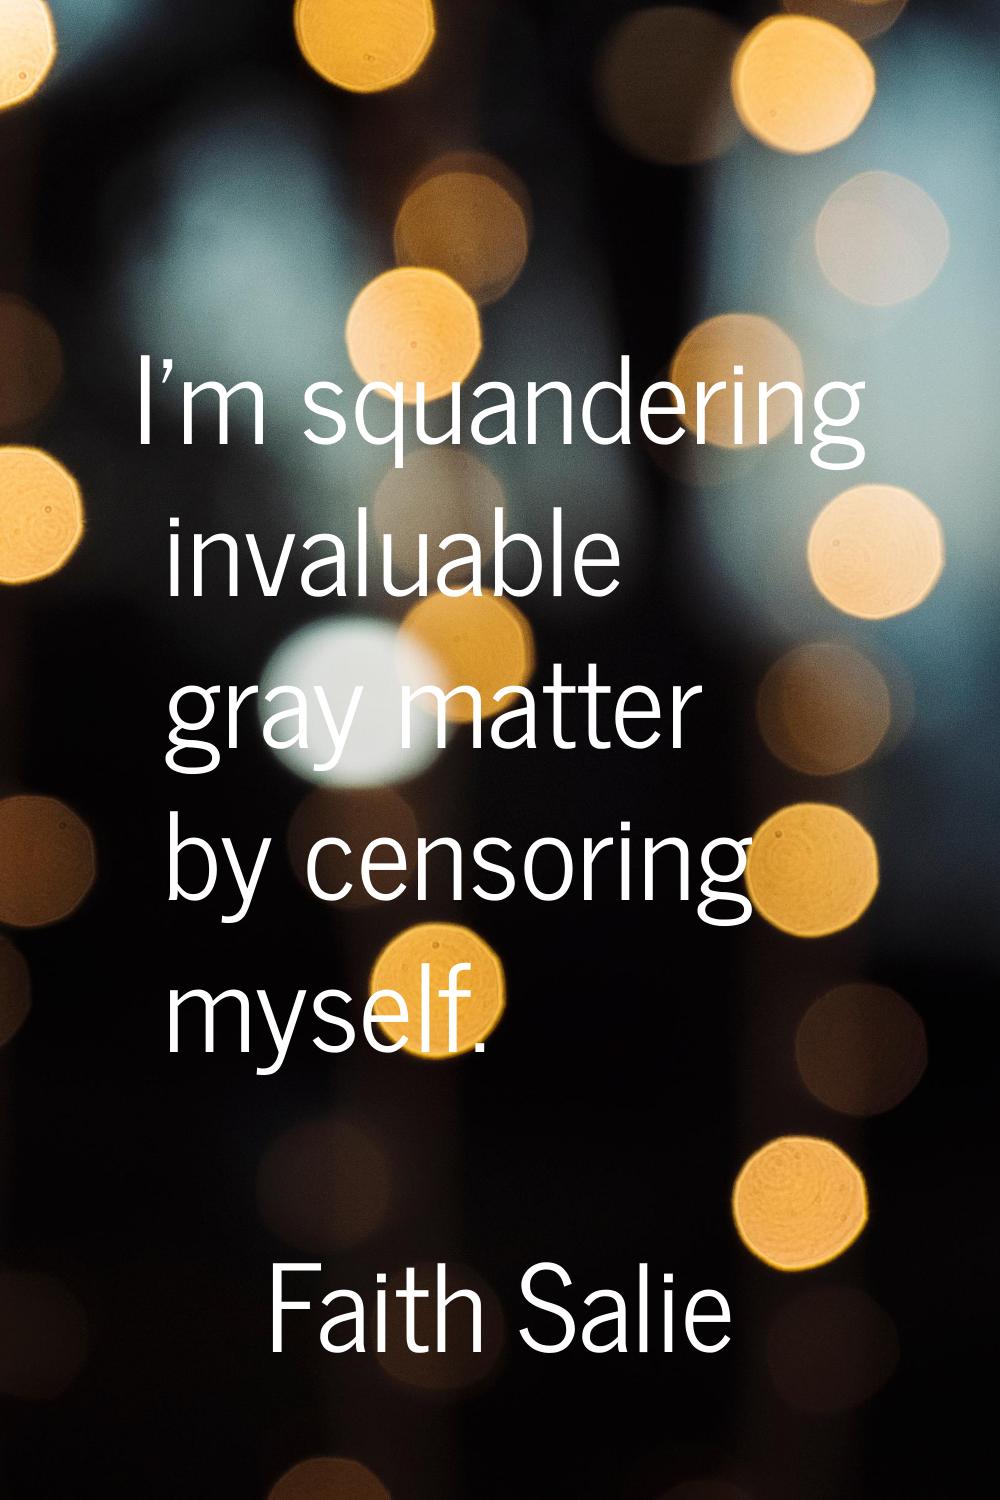 I'm squandering invaluable gray matter by censoring myself.